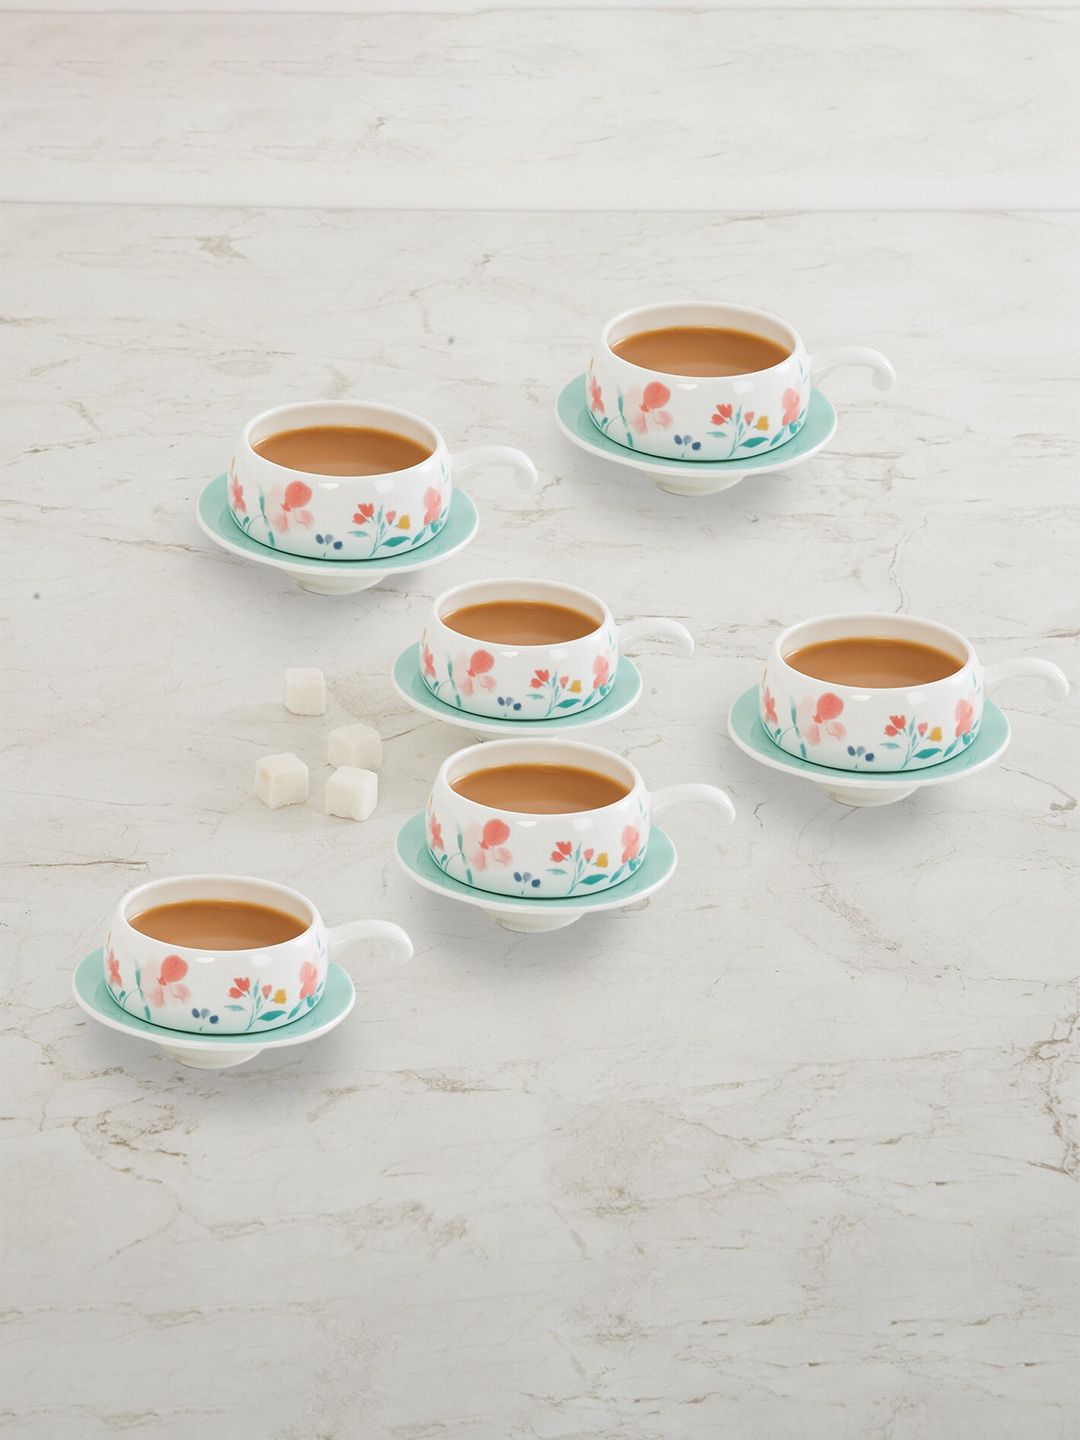 Home Centre Set of 6 White & Peach-Coloured Printed Bone China Glossy Cups and Saucers Price in India